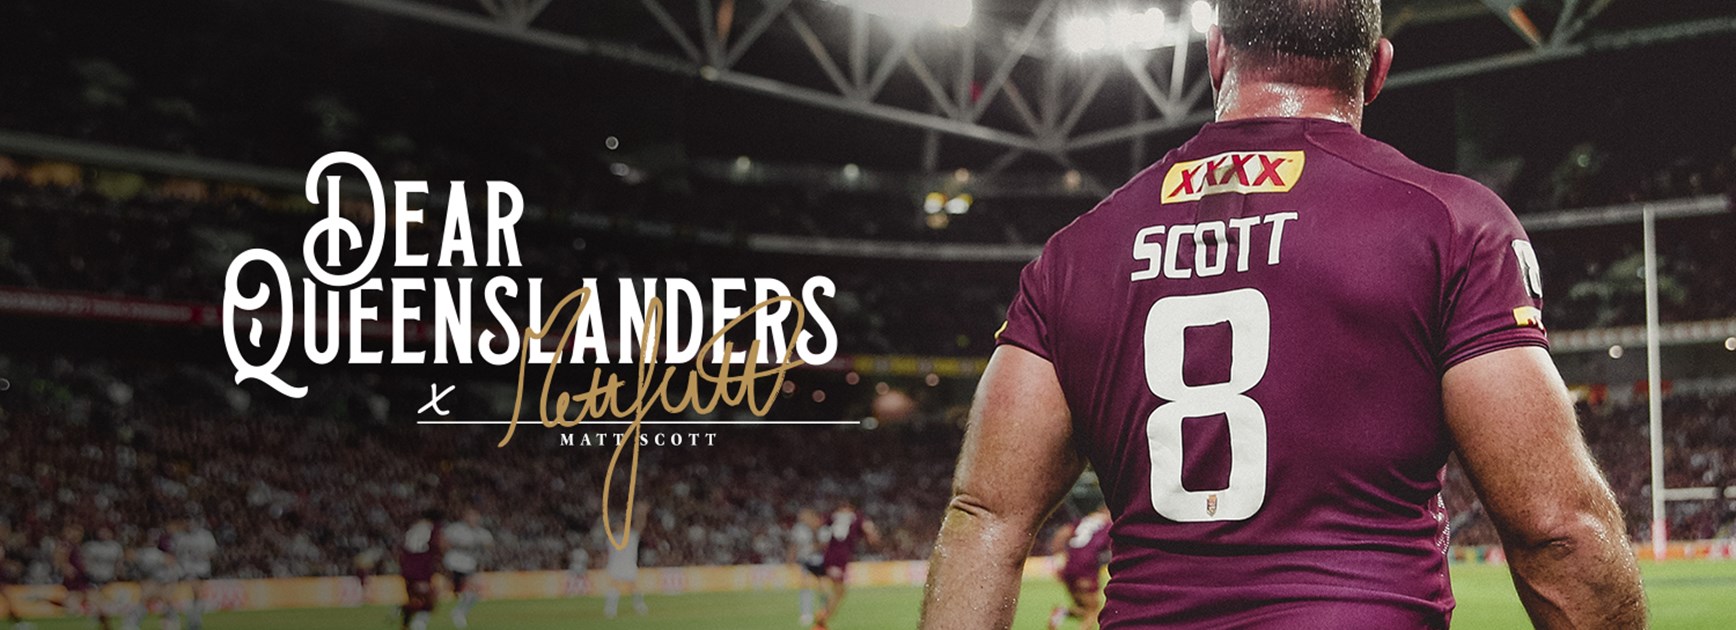 'Being a Queenslander means everything to me'